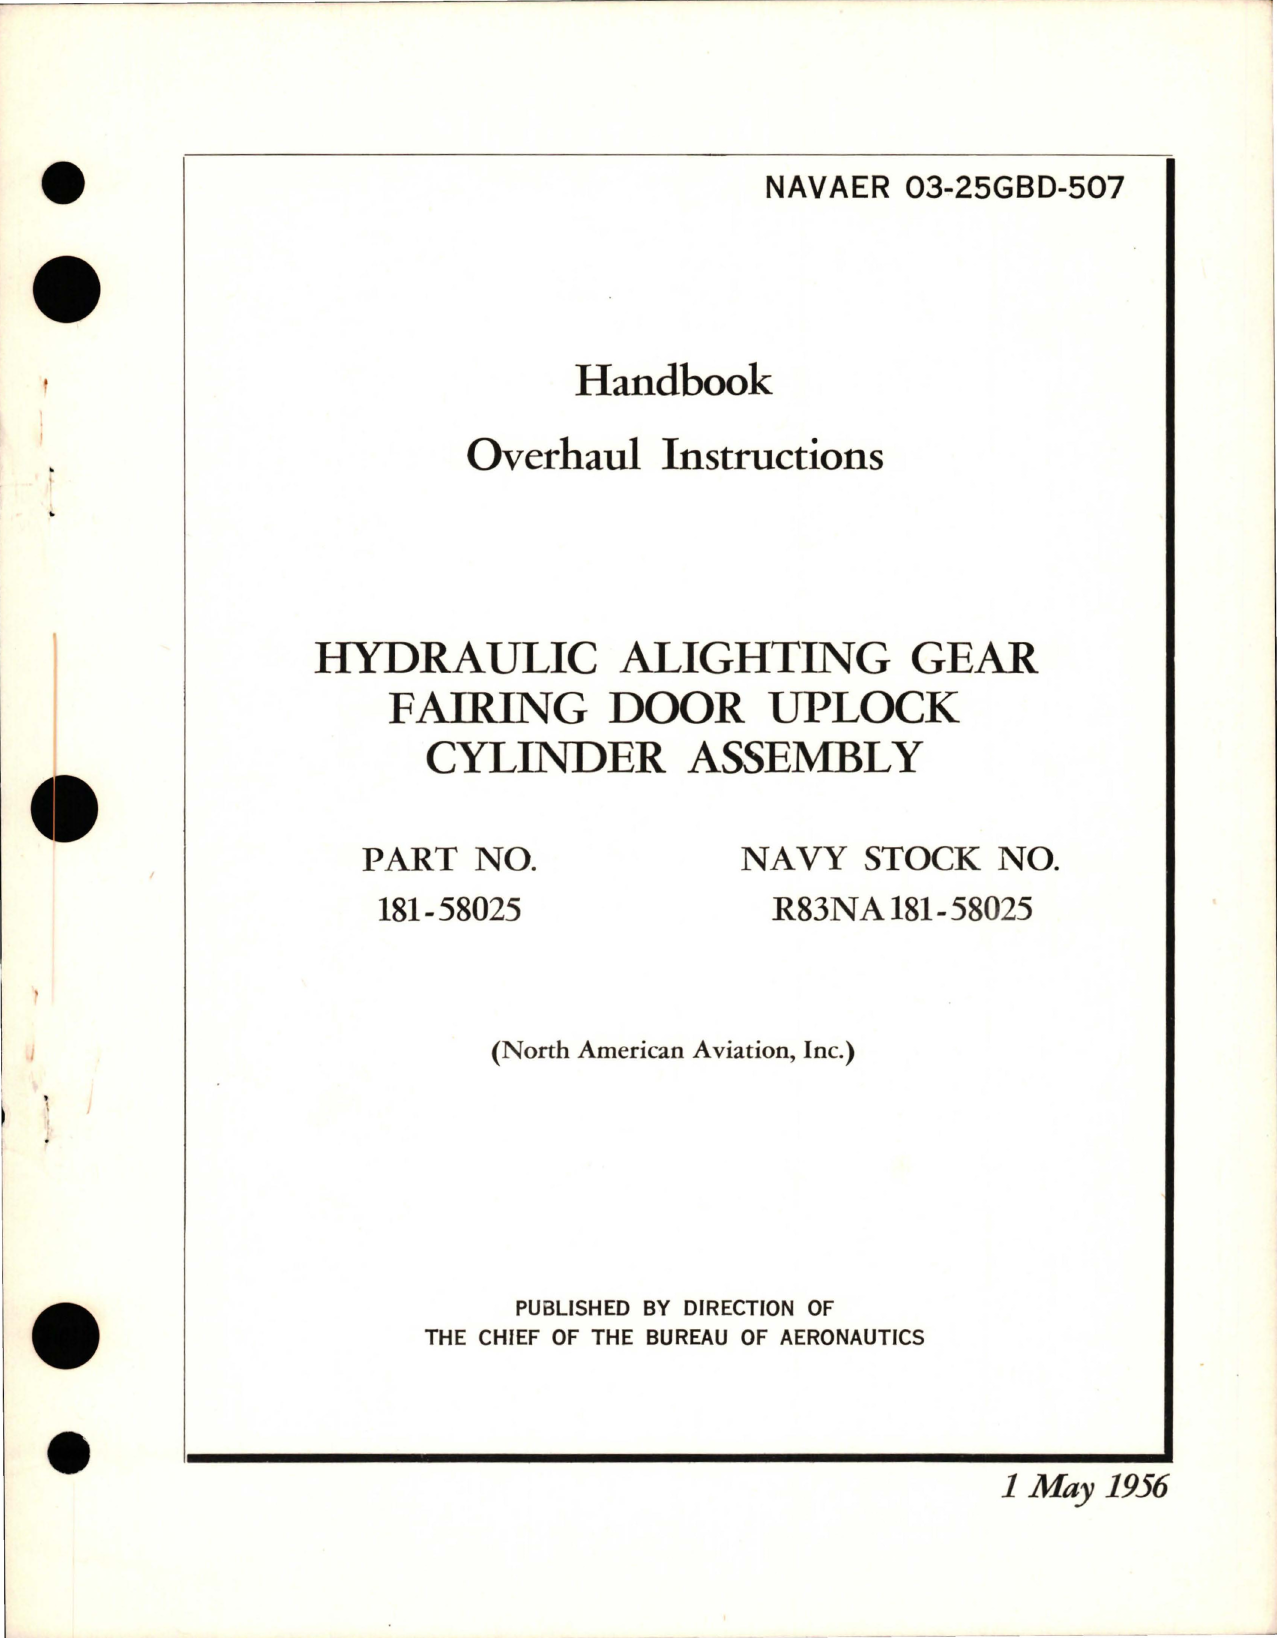 Sample page 1 from AirCorps Library document: Overhaul Instructions for Hydraulic Alighting Gear Fairing Door Uplock Cylinder Assy - Part 181-58025 